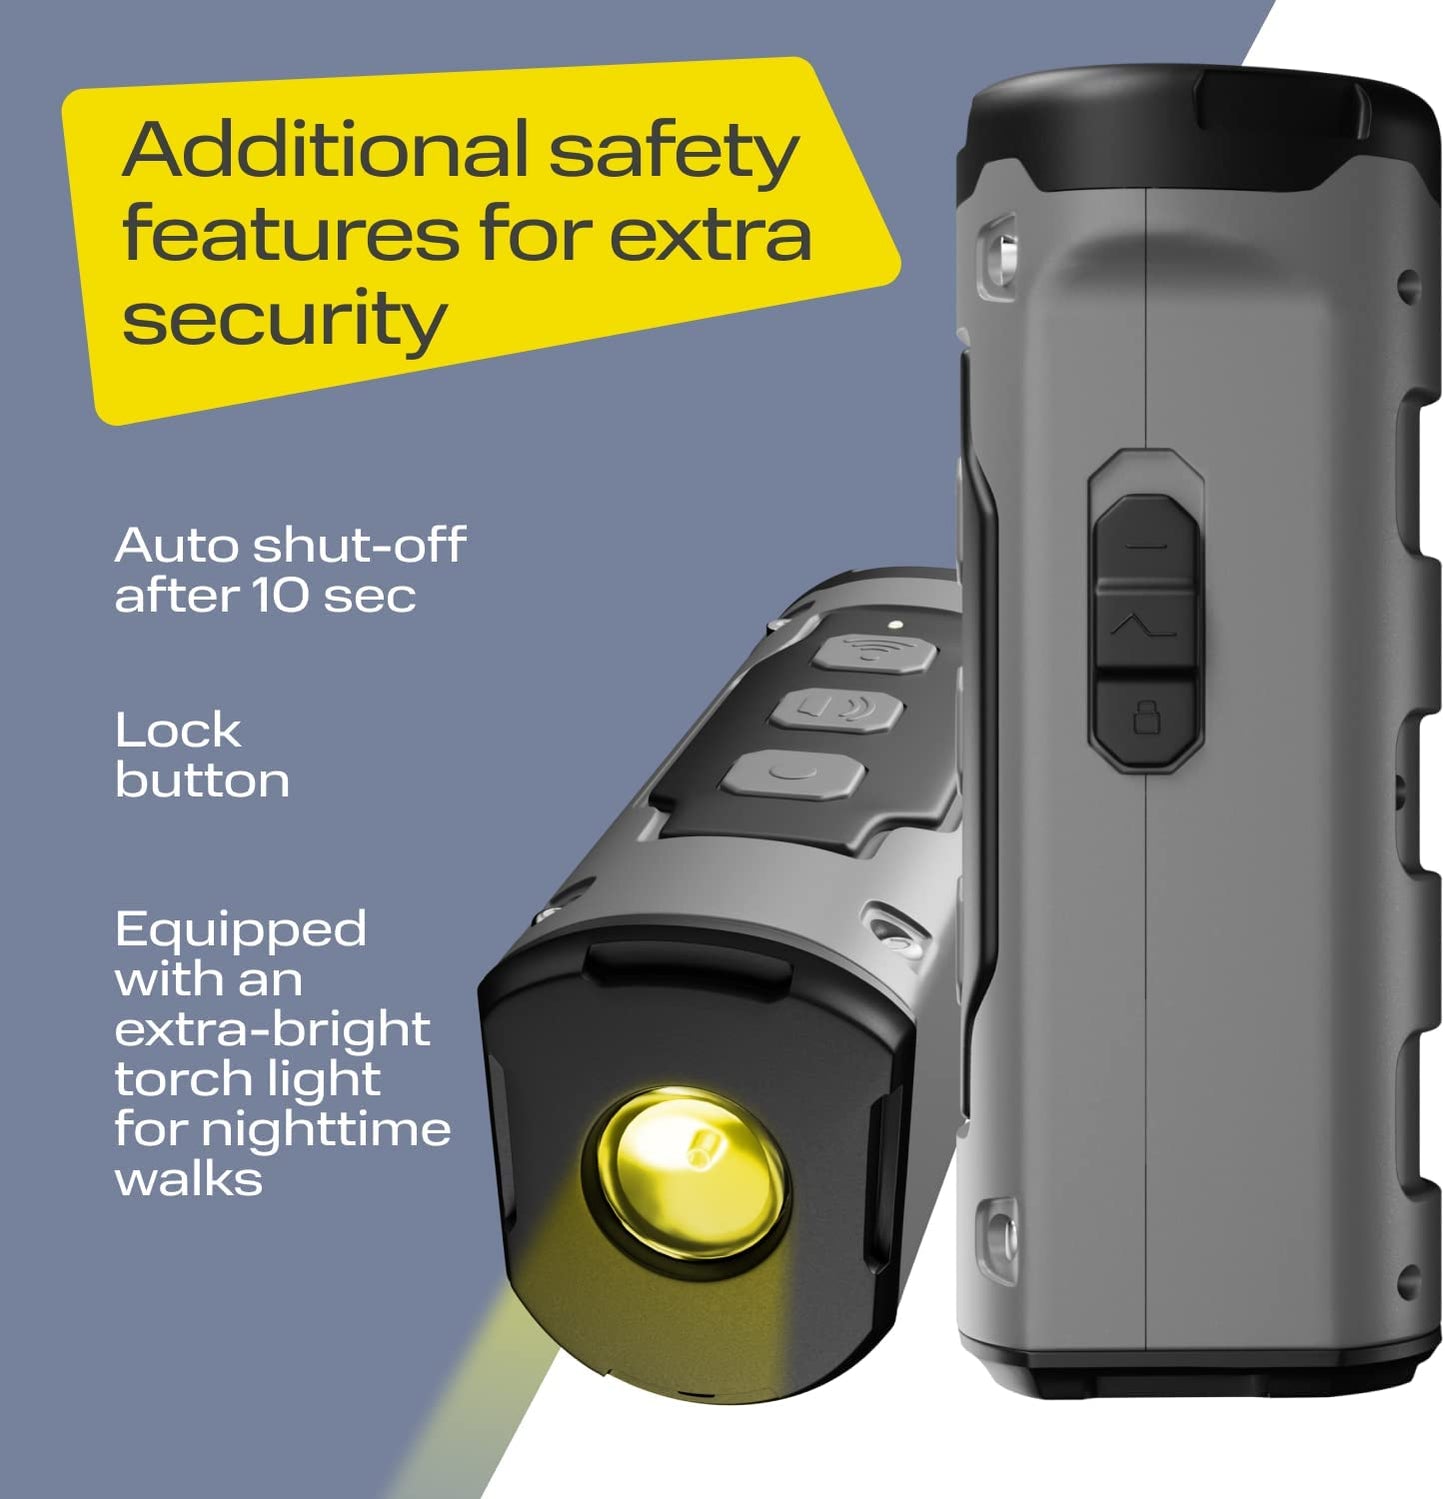 ultrasonic- additional safety features for extra security auto shut-off after 10 sec lock button equipped with an extra-bright torch light for nighttime walks